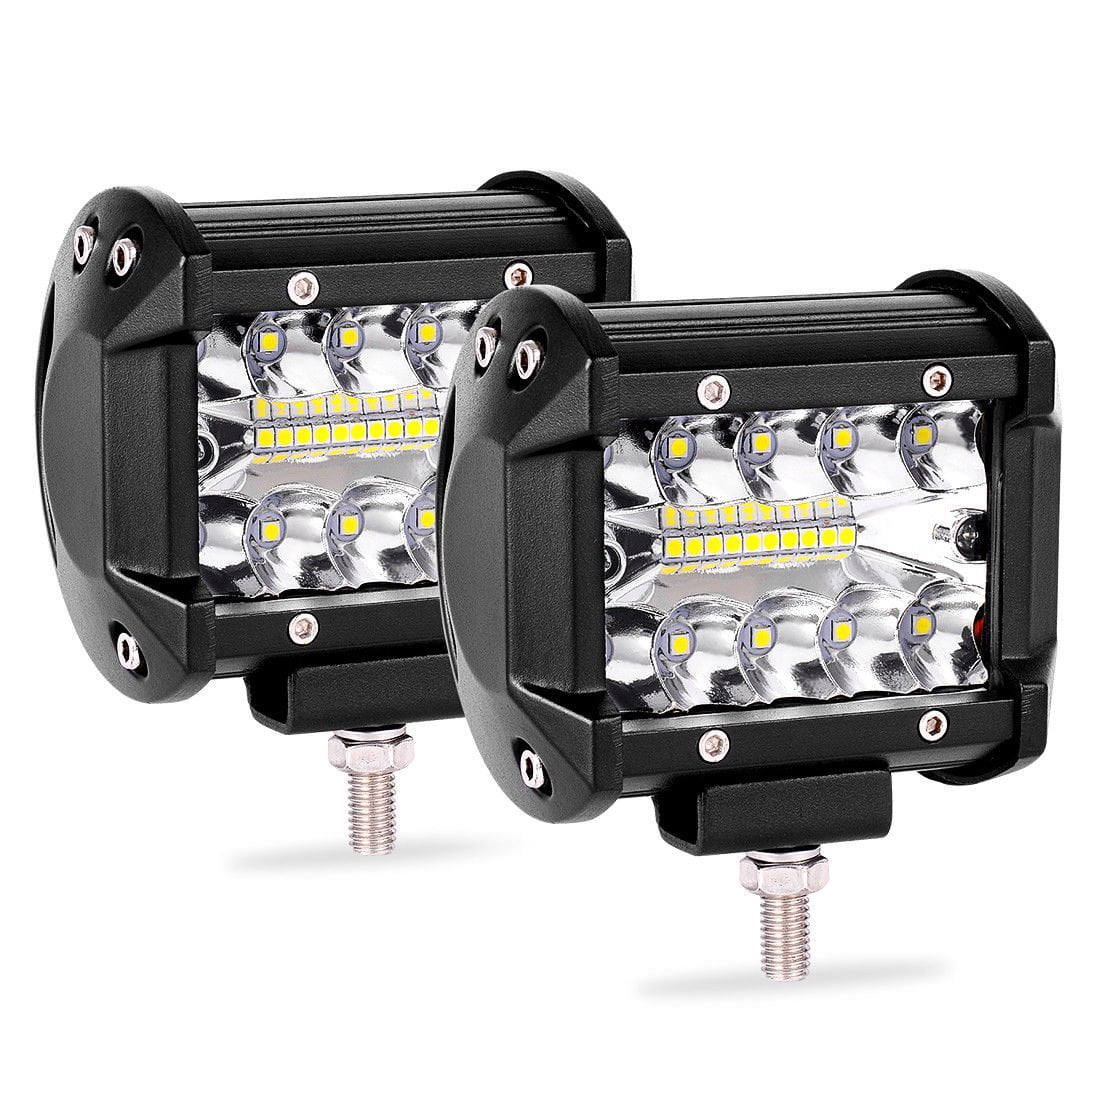 2X 3inch 16W Flood LED Work Light Square Cube Pods Offroad Fog 4WD Bumper 